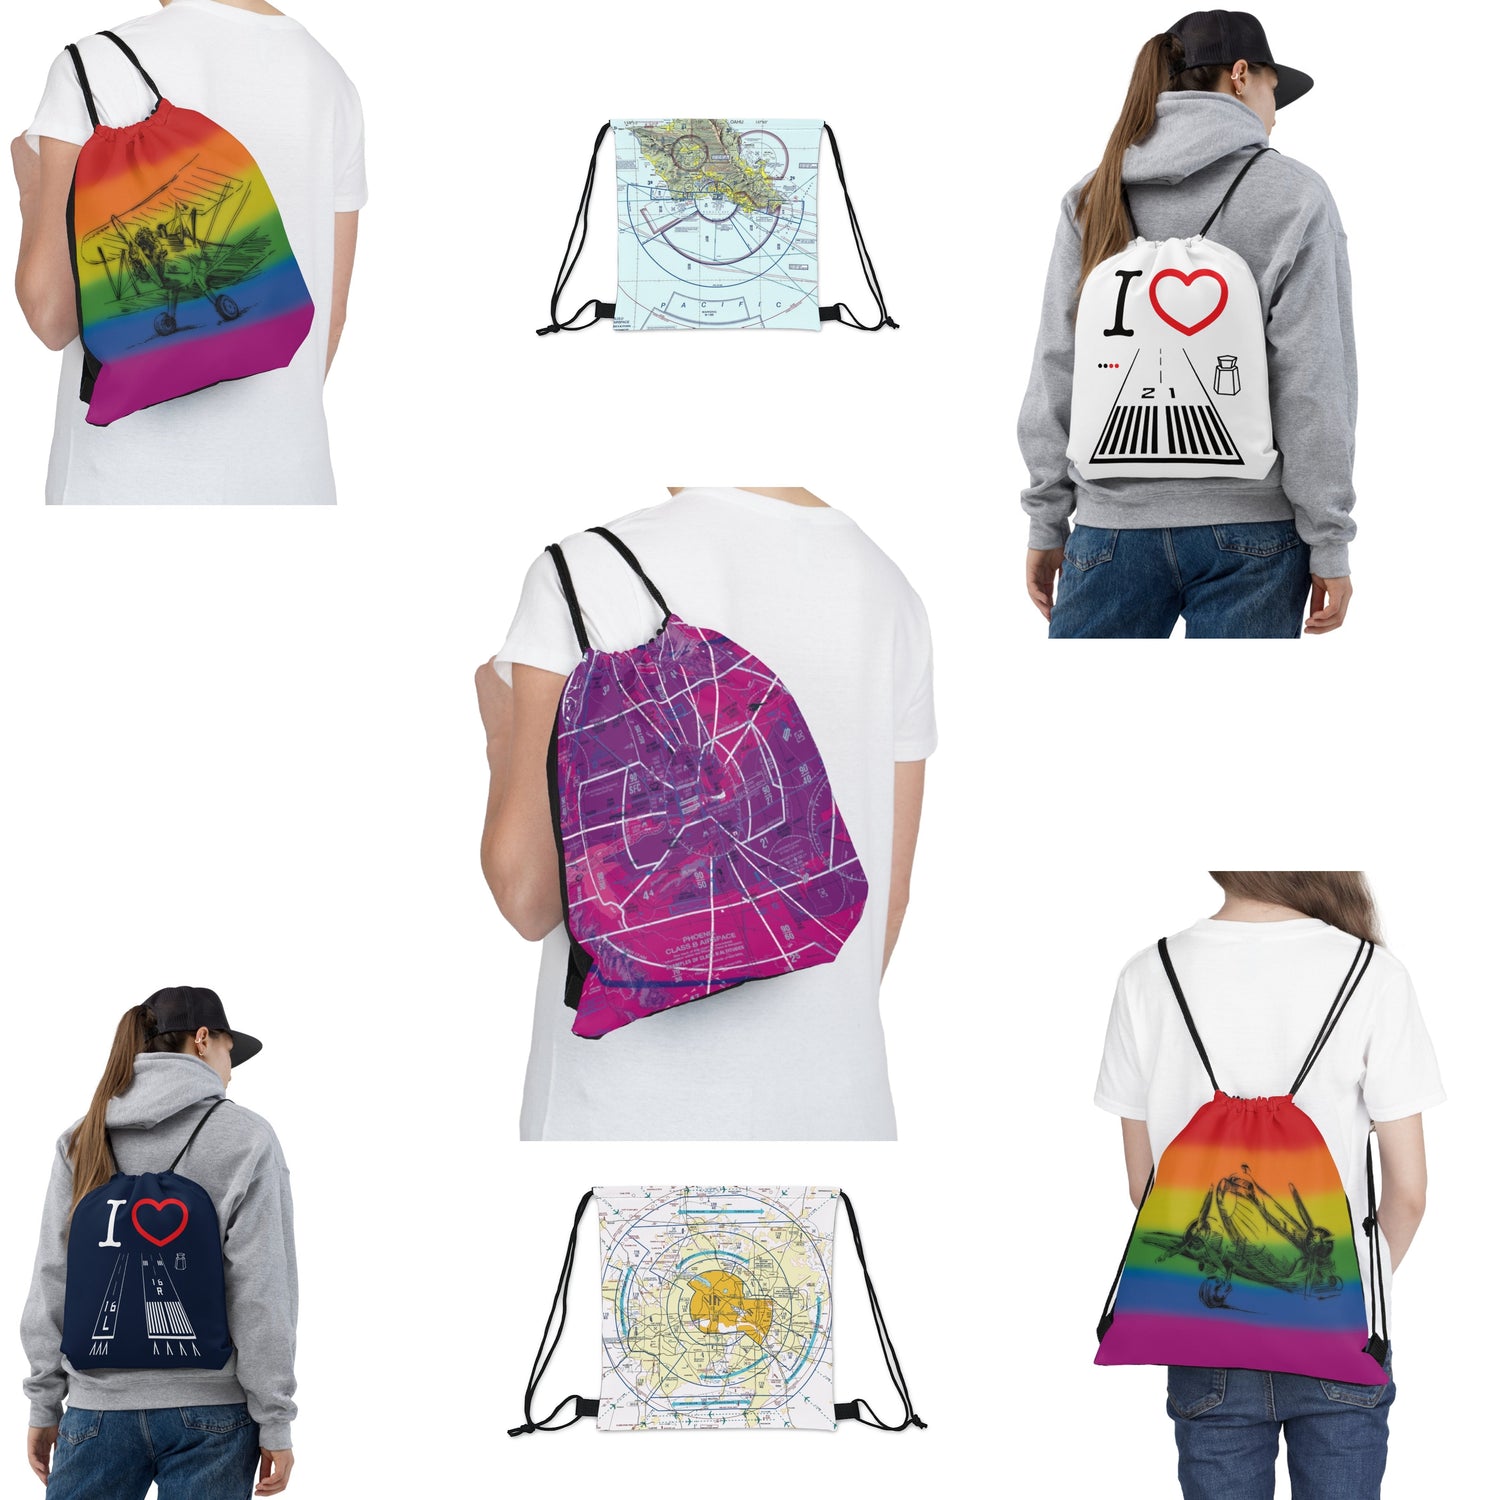 Aviation themed colorful drawstring bags